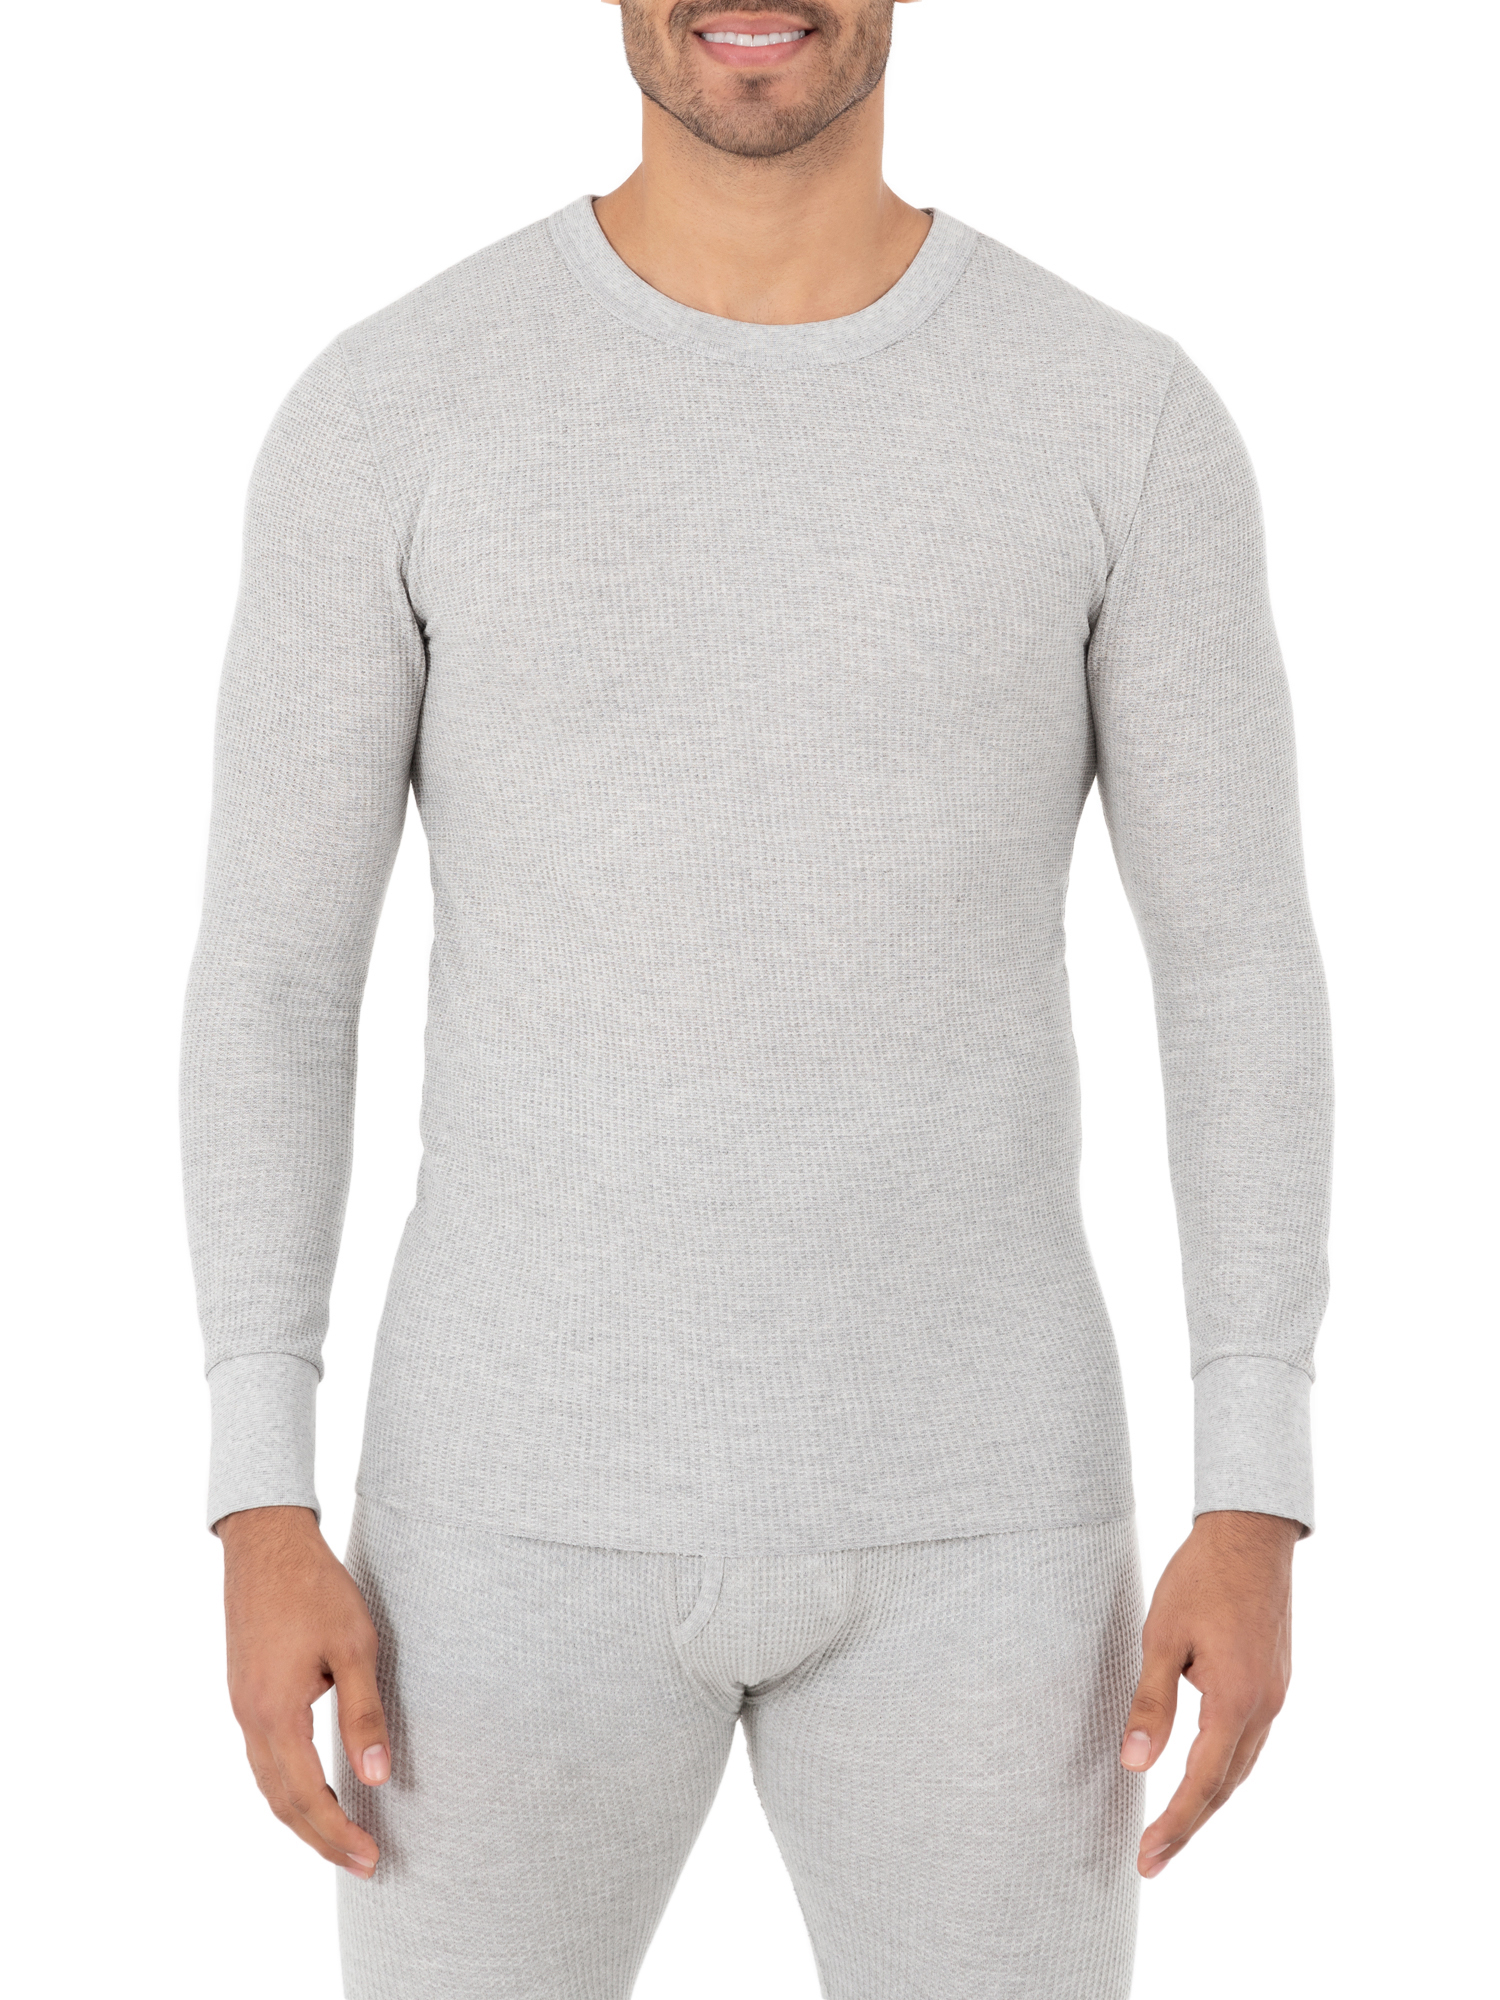 Fruit of the Loom Men's Core Waffle Thermal Top - image 1 of 5